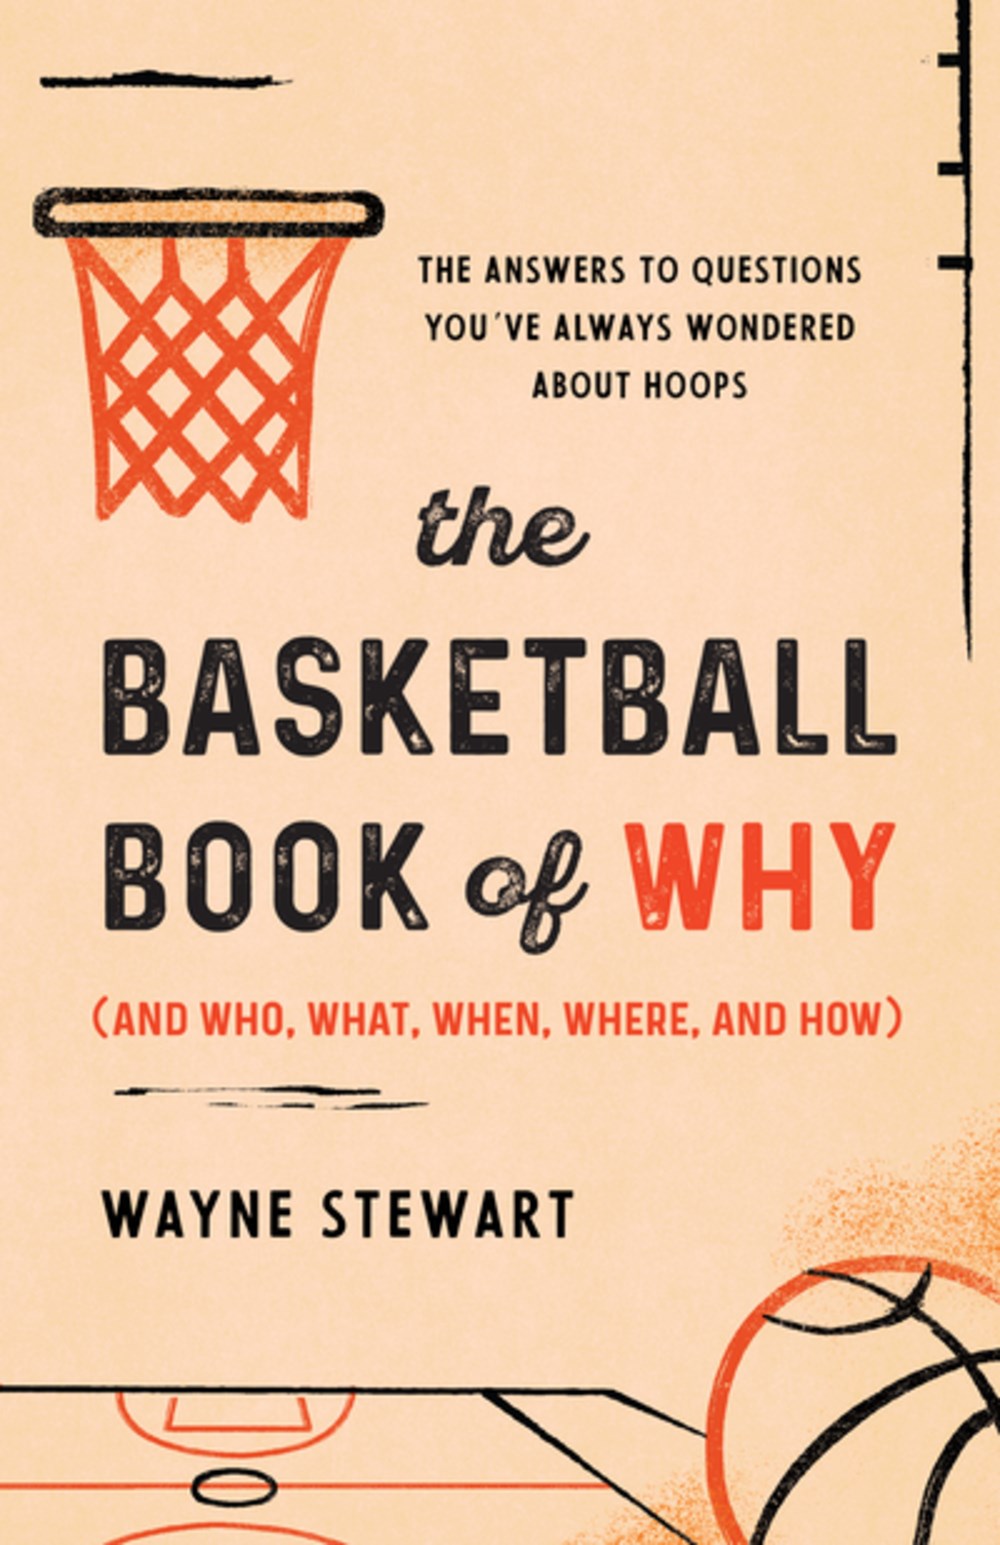 The Basketball Book of Why (and Who, What, When, Where, and How): The Answers to Questions You’ve Always Wondered About Hoops